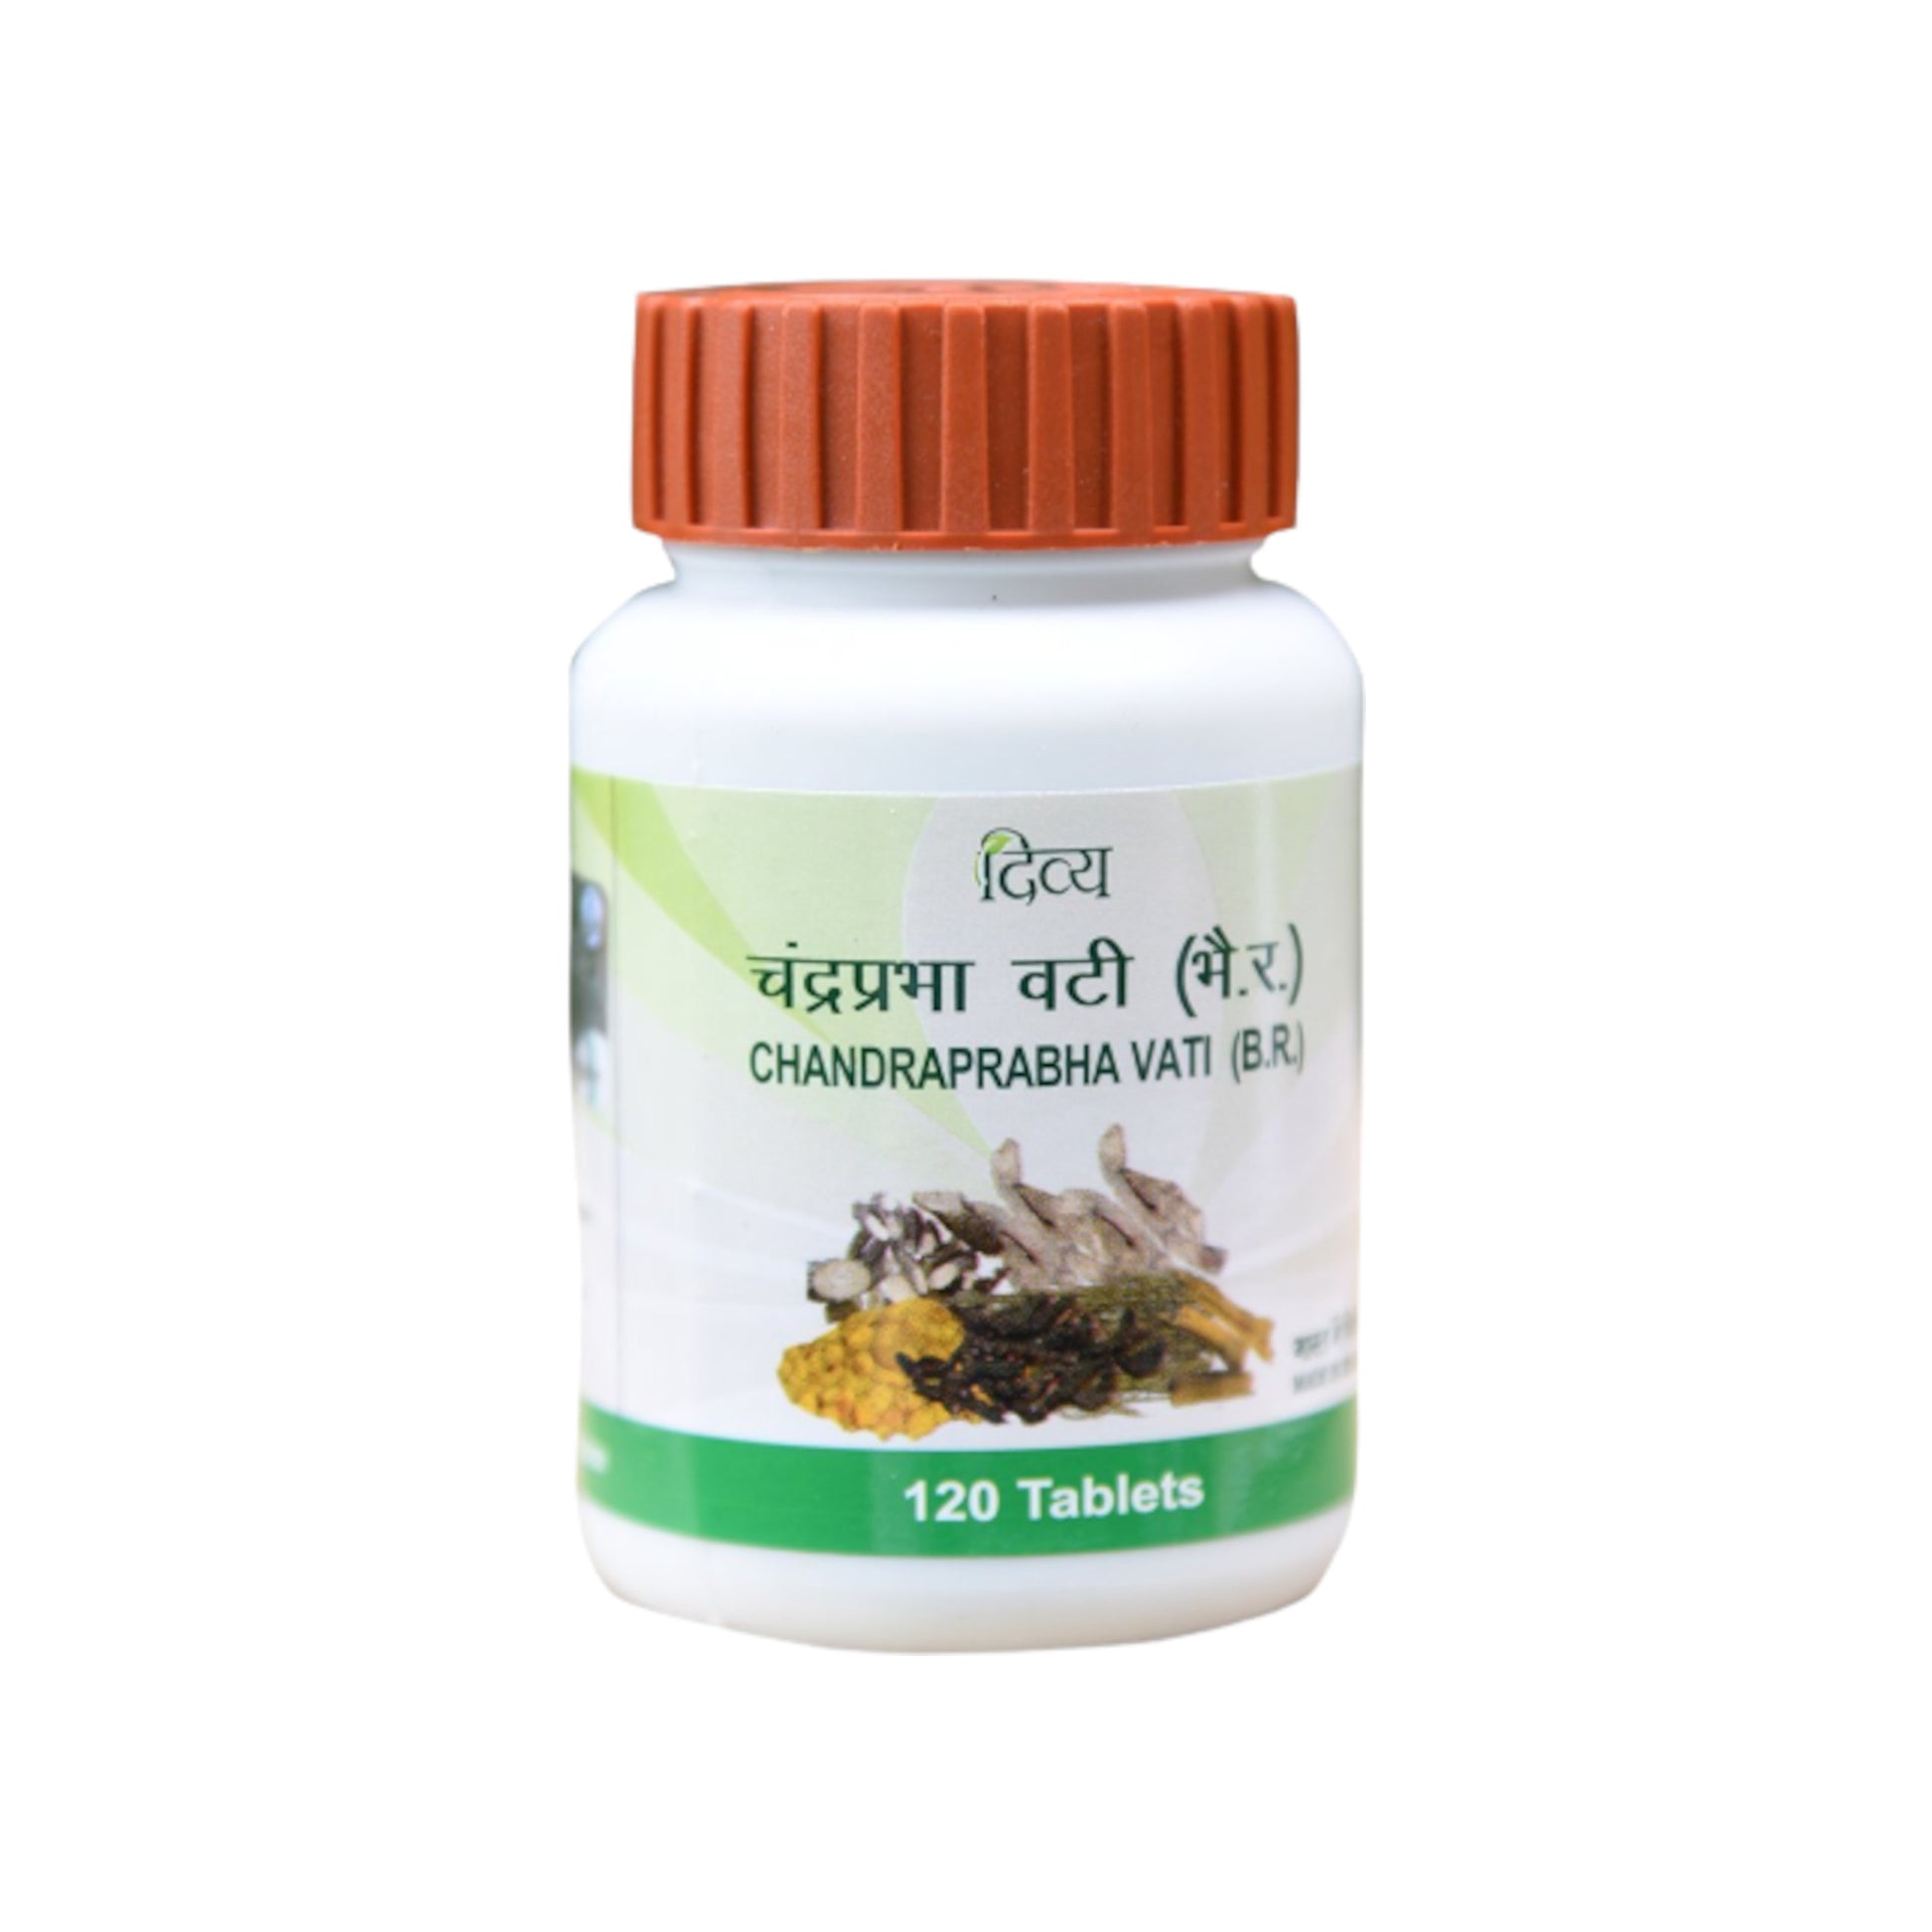 Image: Divya Patanjali Chandraprabha Vati 80 Tablets: Ayurvedic remedy for urinary, skin, respiratory, liver, and digestive issues with anti-aging benefits.